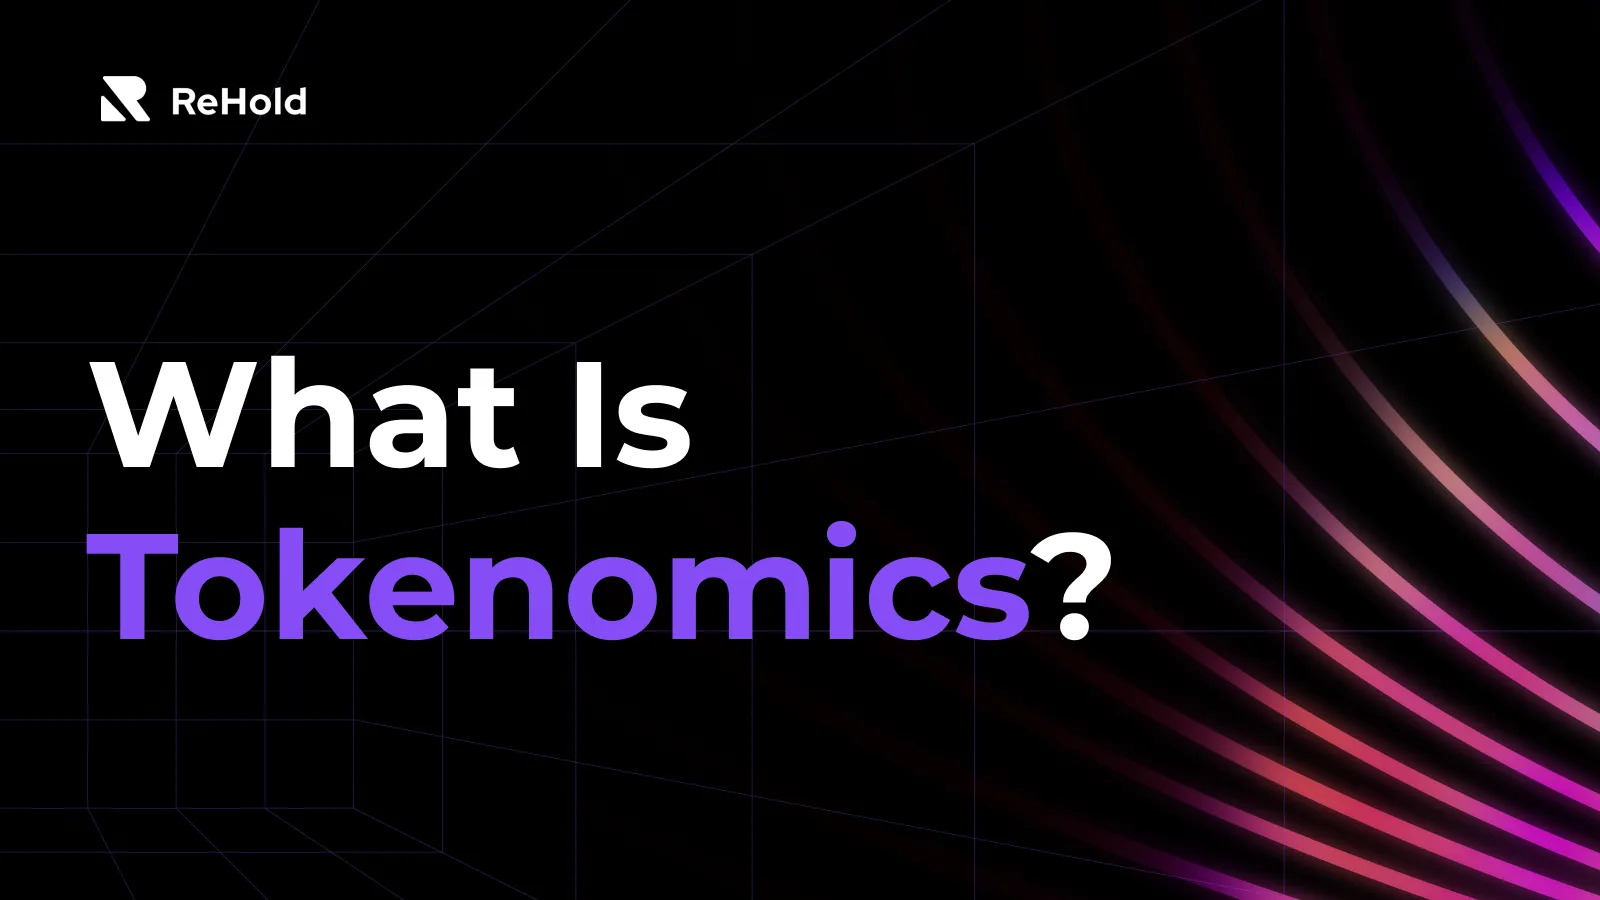  Tokenomics: What It Is And Why It Is Important